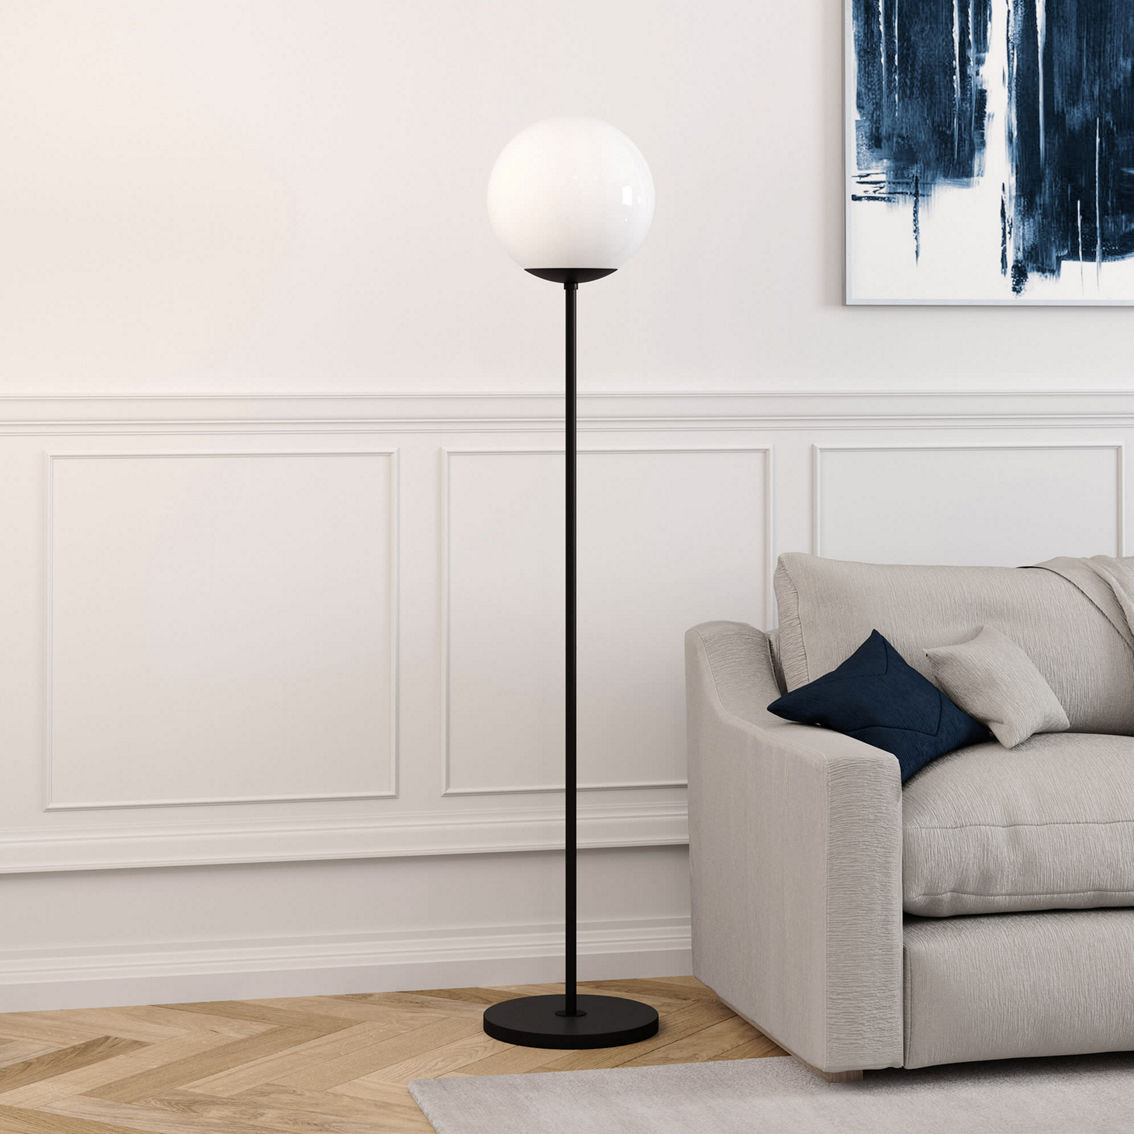 Hudson&Canal Theia Globe & Stem Floor Lamp with Plastic Shade - Image 2 of 5